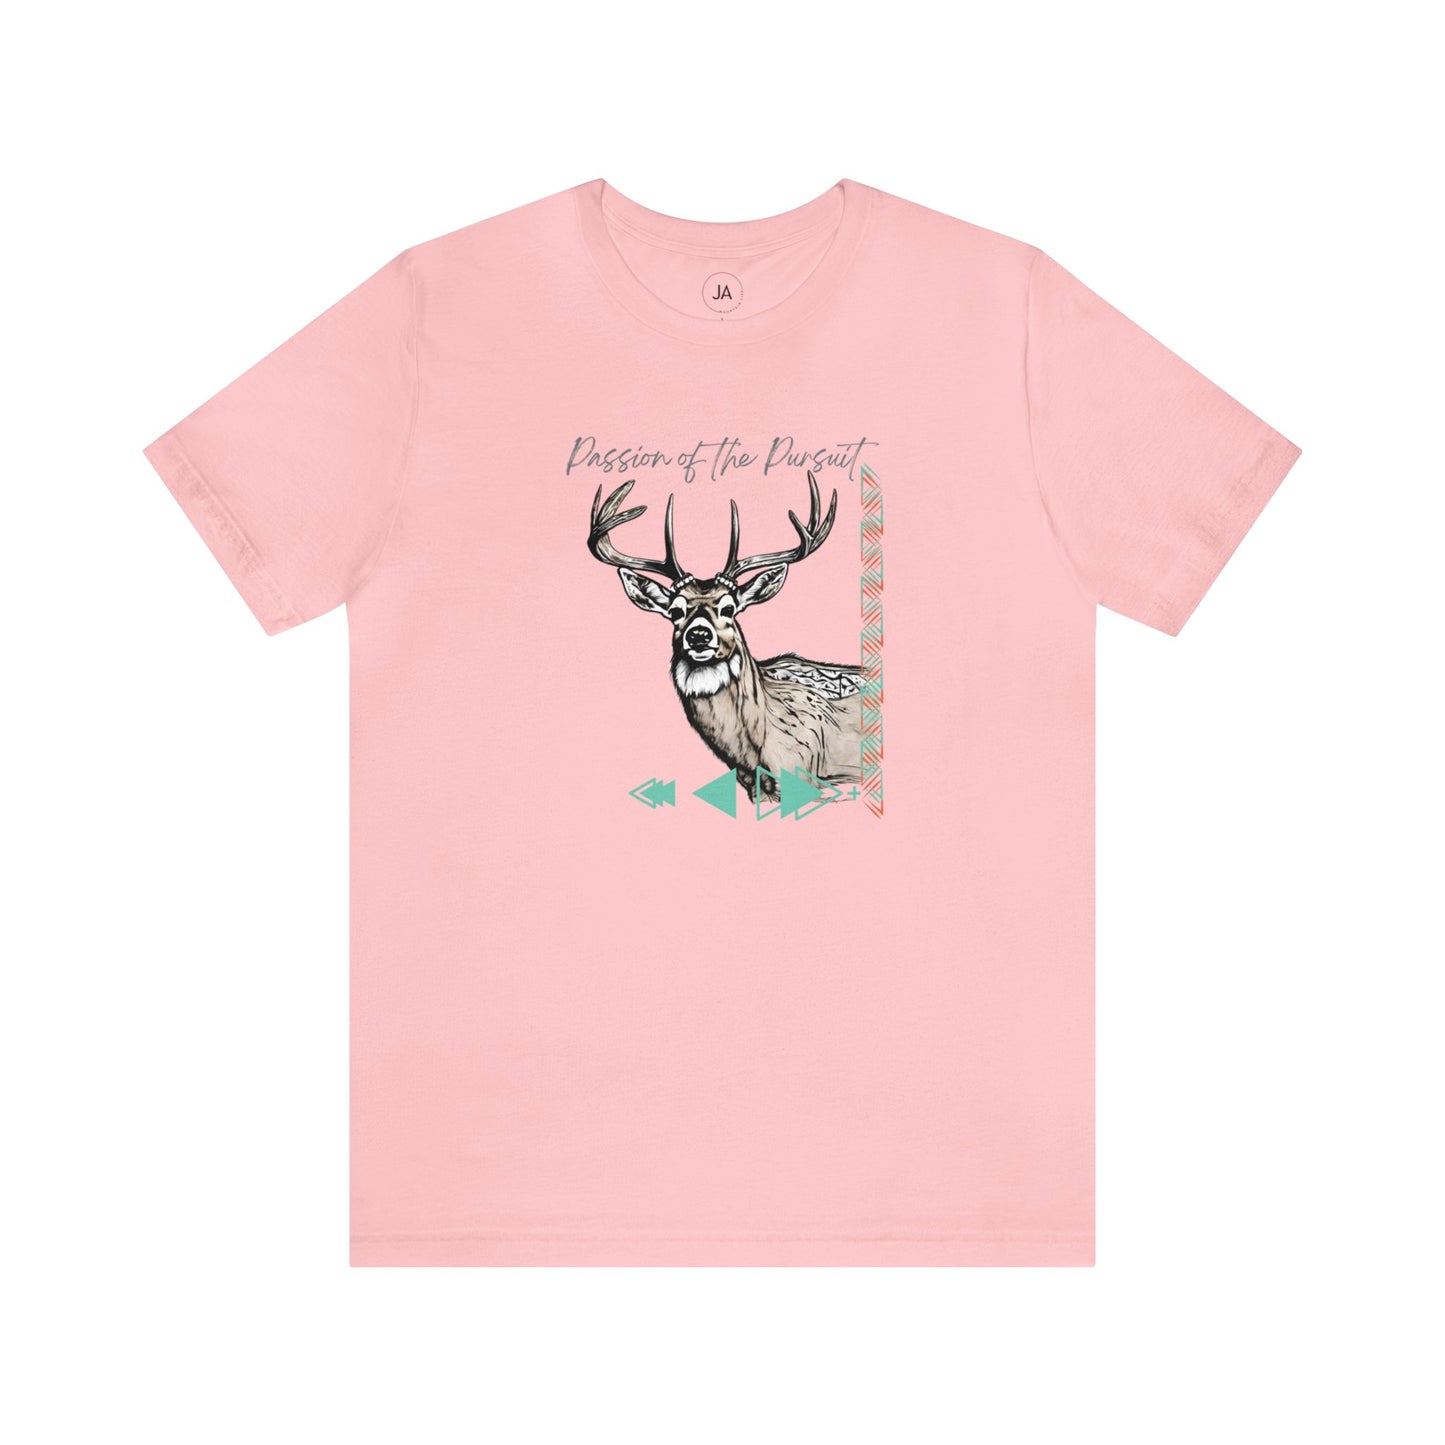 Buck Passion of the Pursuit Tee